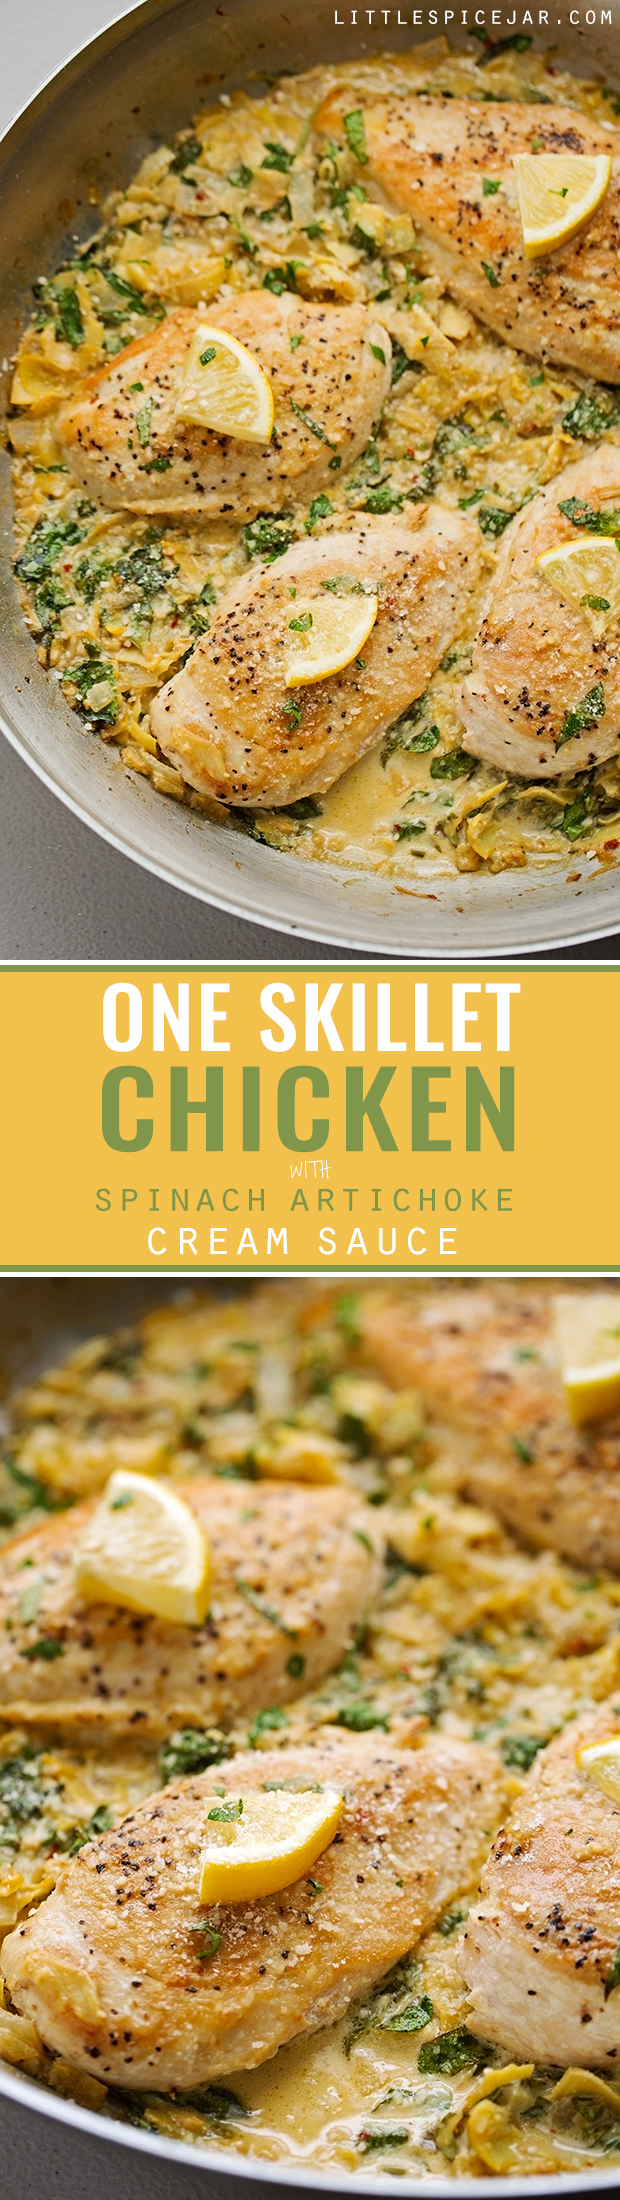 One Skillet Chicken topped with a Spinach Artichoke Cream Sauce - Ready in 30 minutes and perfect over a bed of angel hair pasta! #spinachchicken #skilletchicken #oneskilletchicken | Littlespicejar.com @littlespicejar